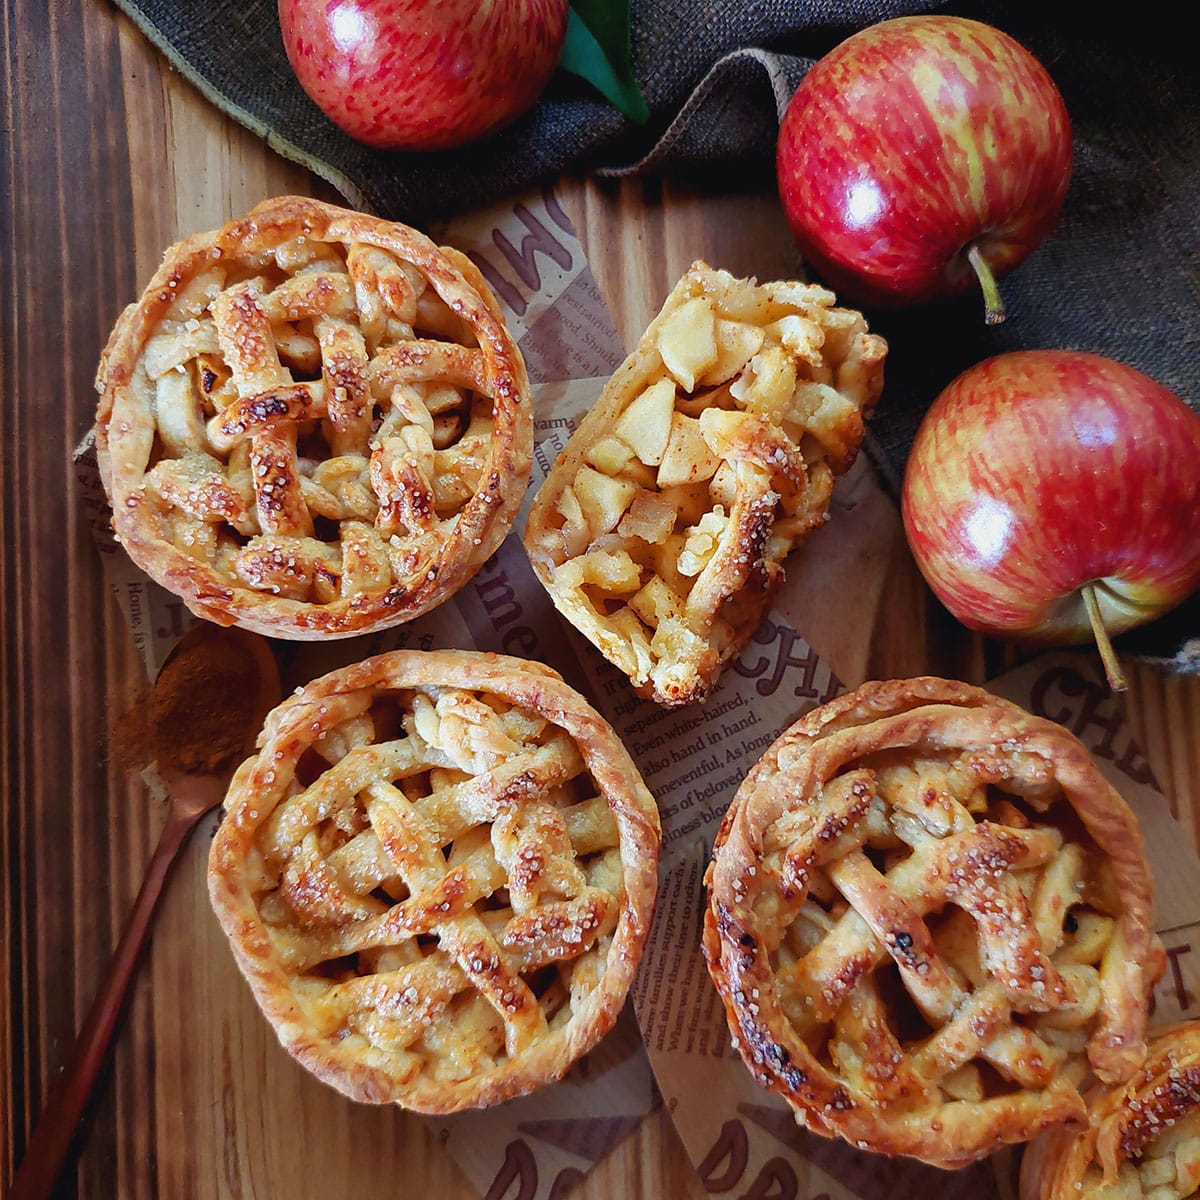 serve these mini apple pies either warm or after they have cooled